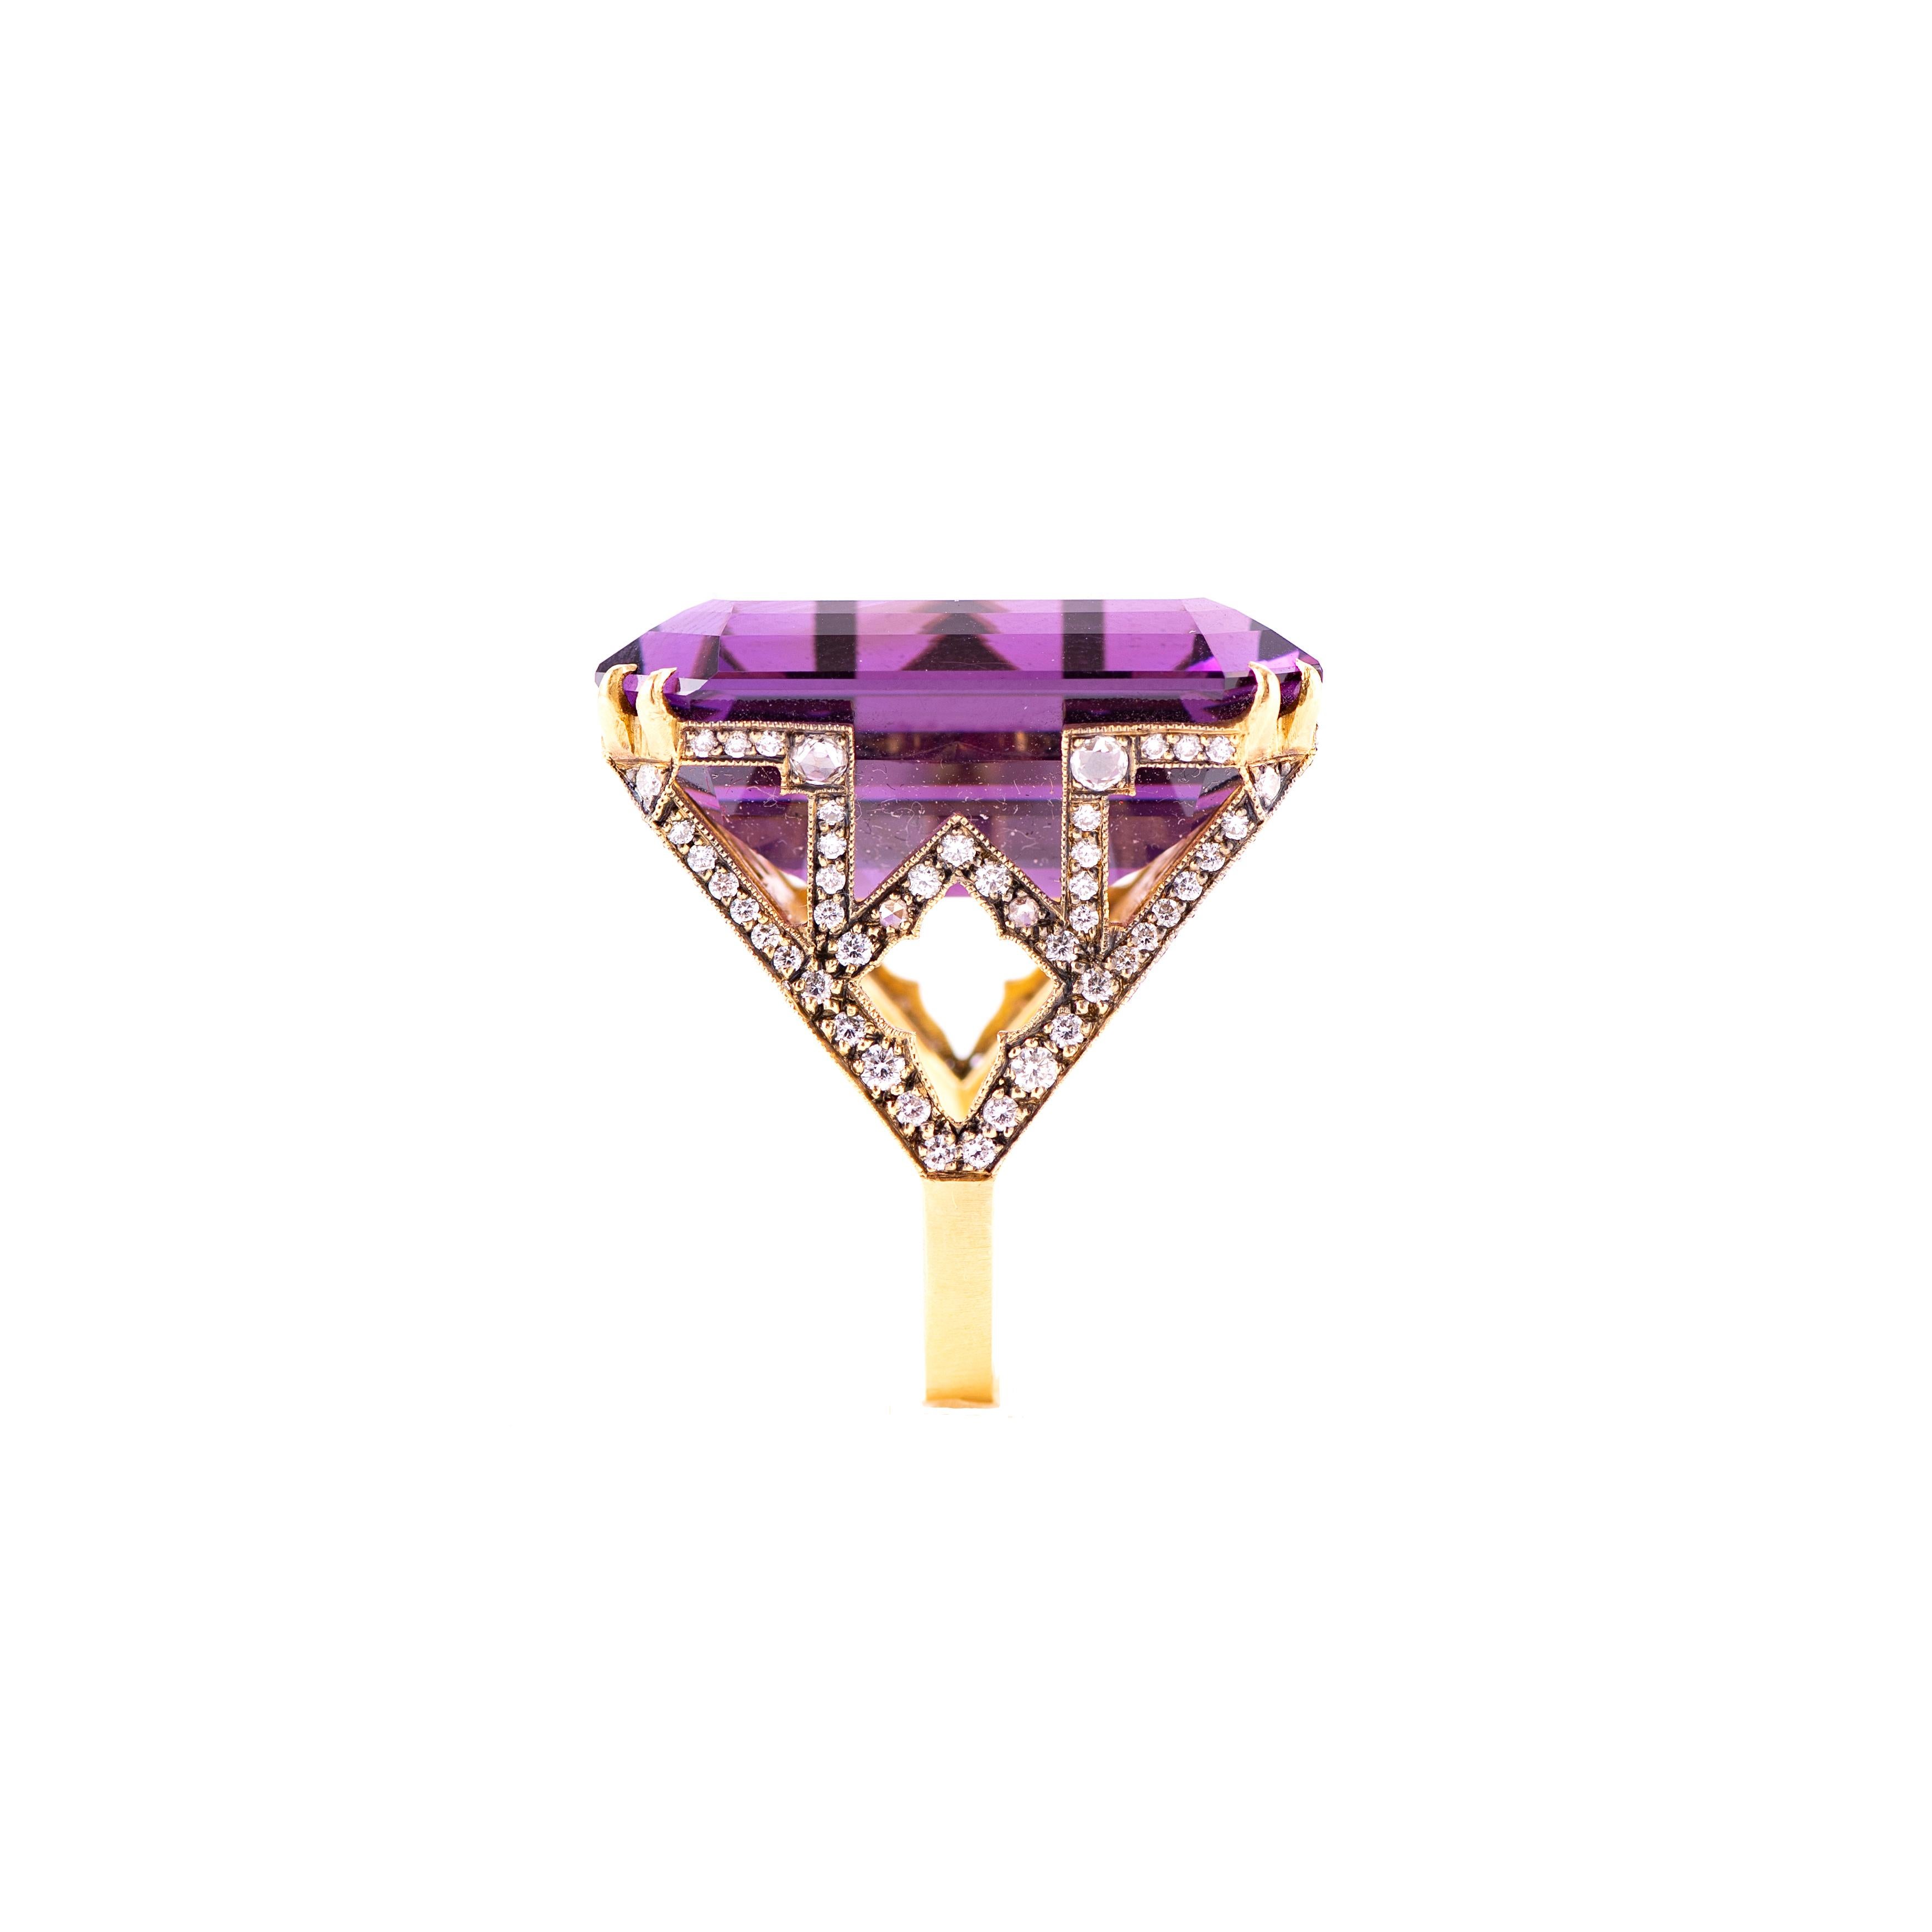 Sylva & Cie Mega Emerald Cut Amethyst Cocktail Ring with Diamonds in 18k Gold In New Condition For Sale In Los Angeles, CA